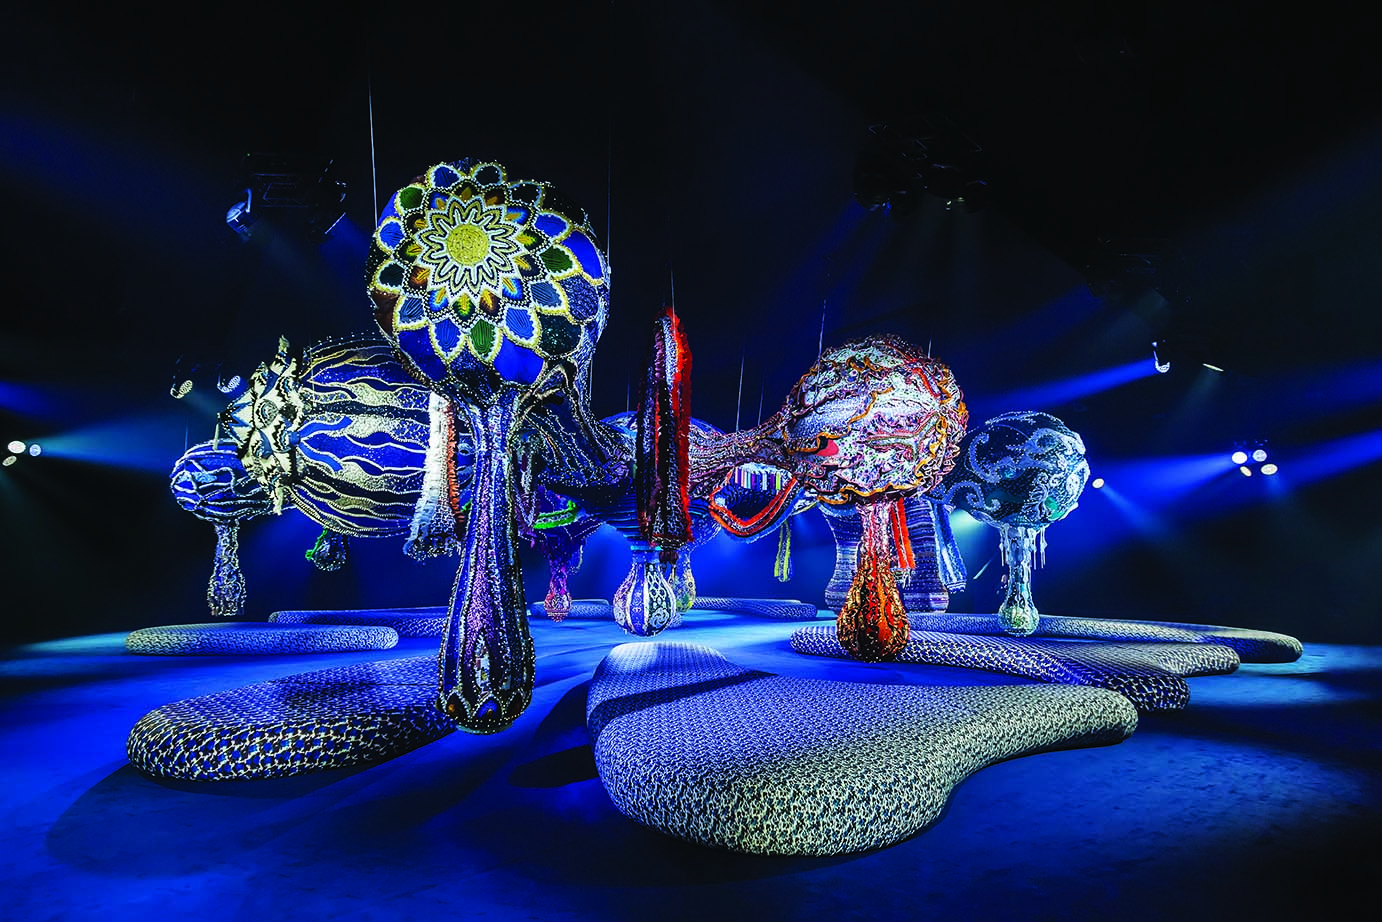 Inflatable textile art shown by Dior in Paris – Fabric Architecture Magazine